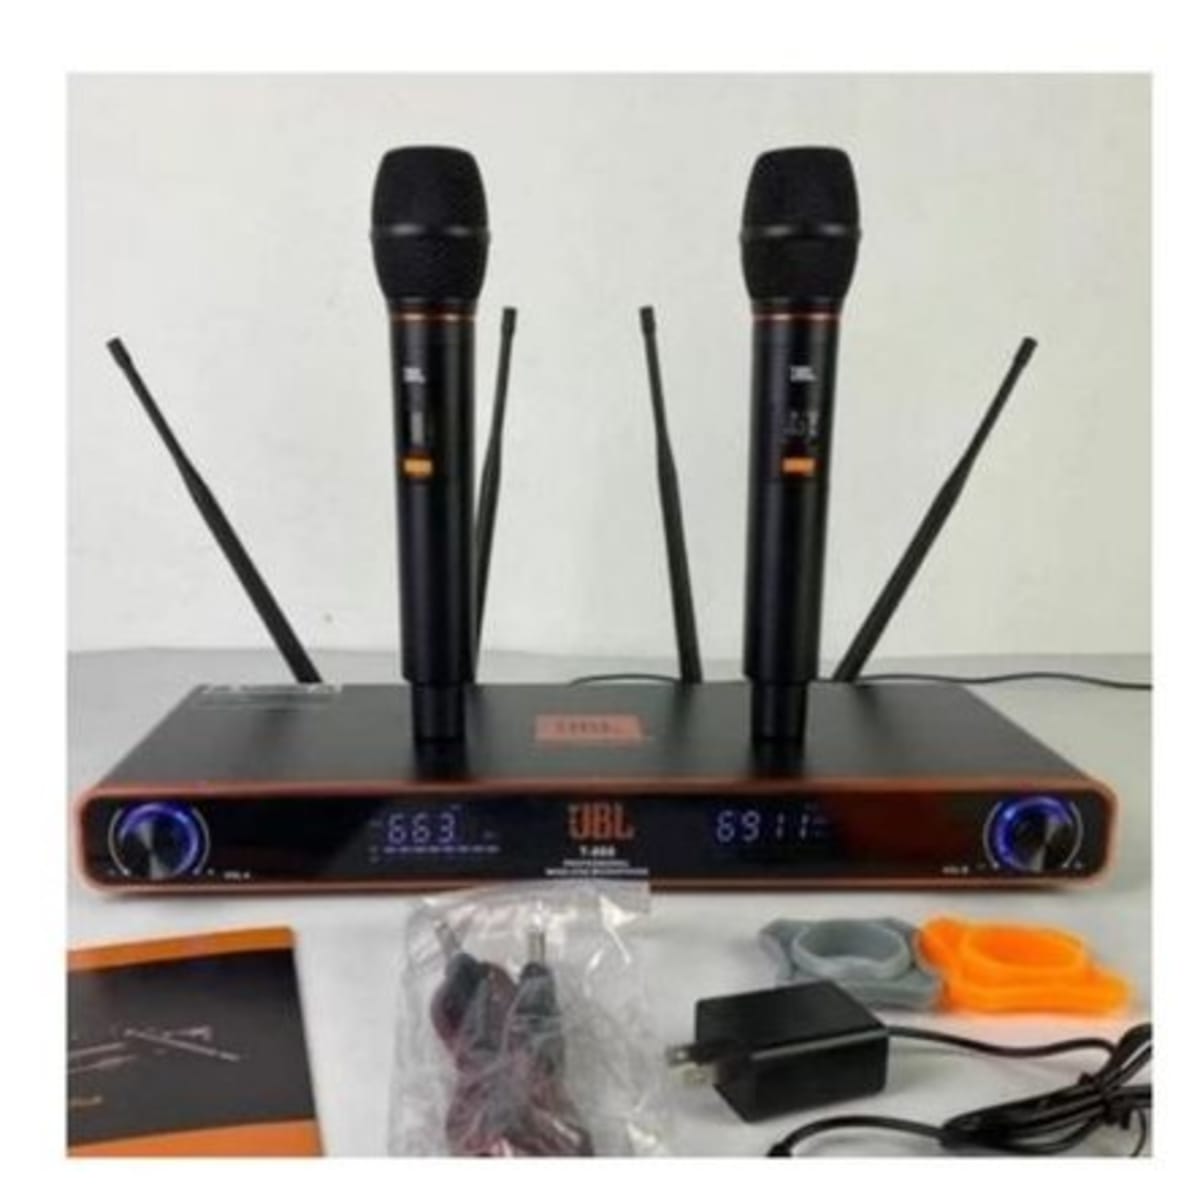 JBL Wireless Two Microphone System